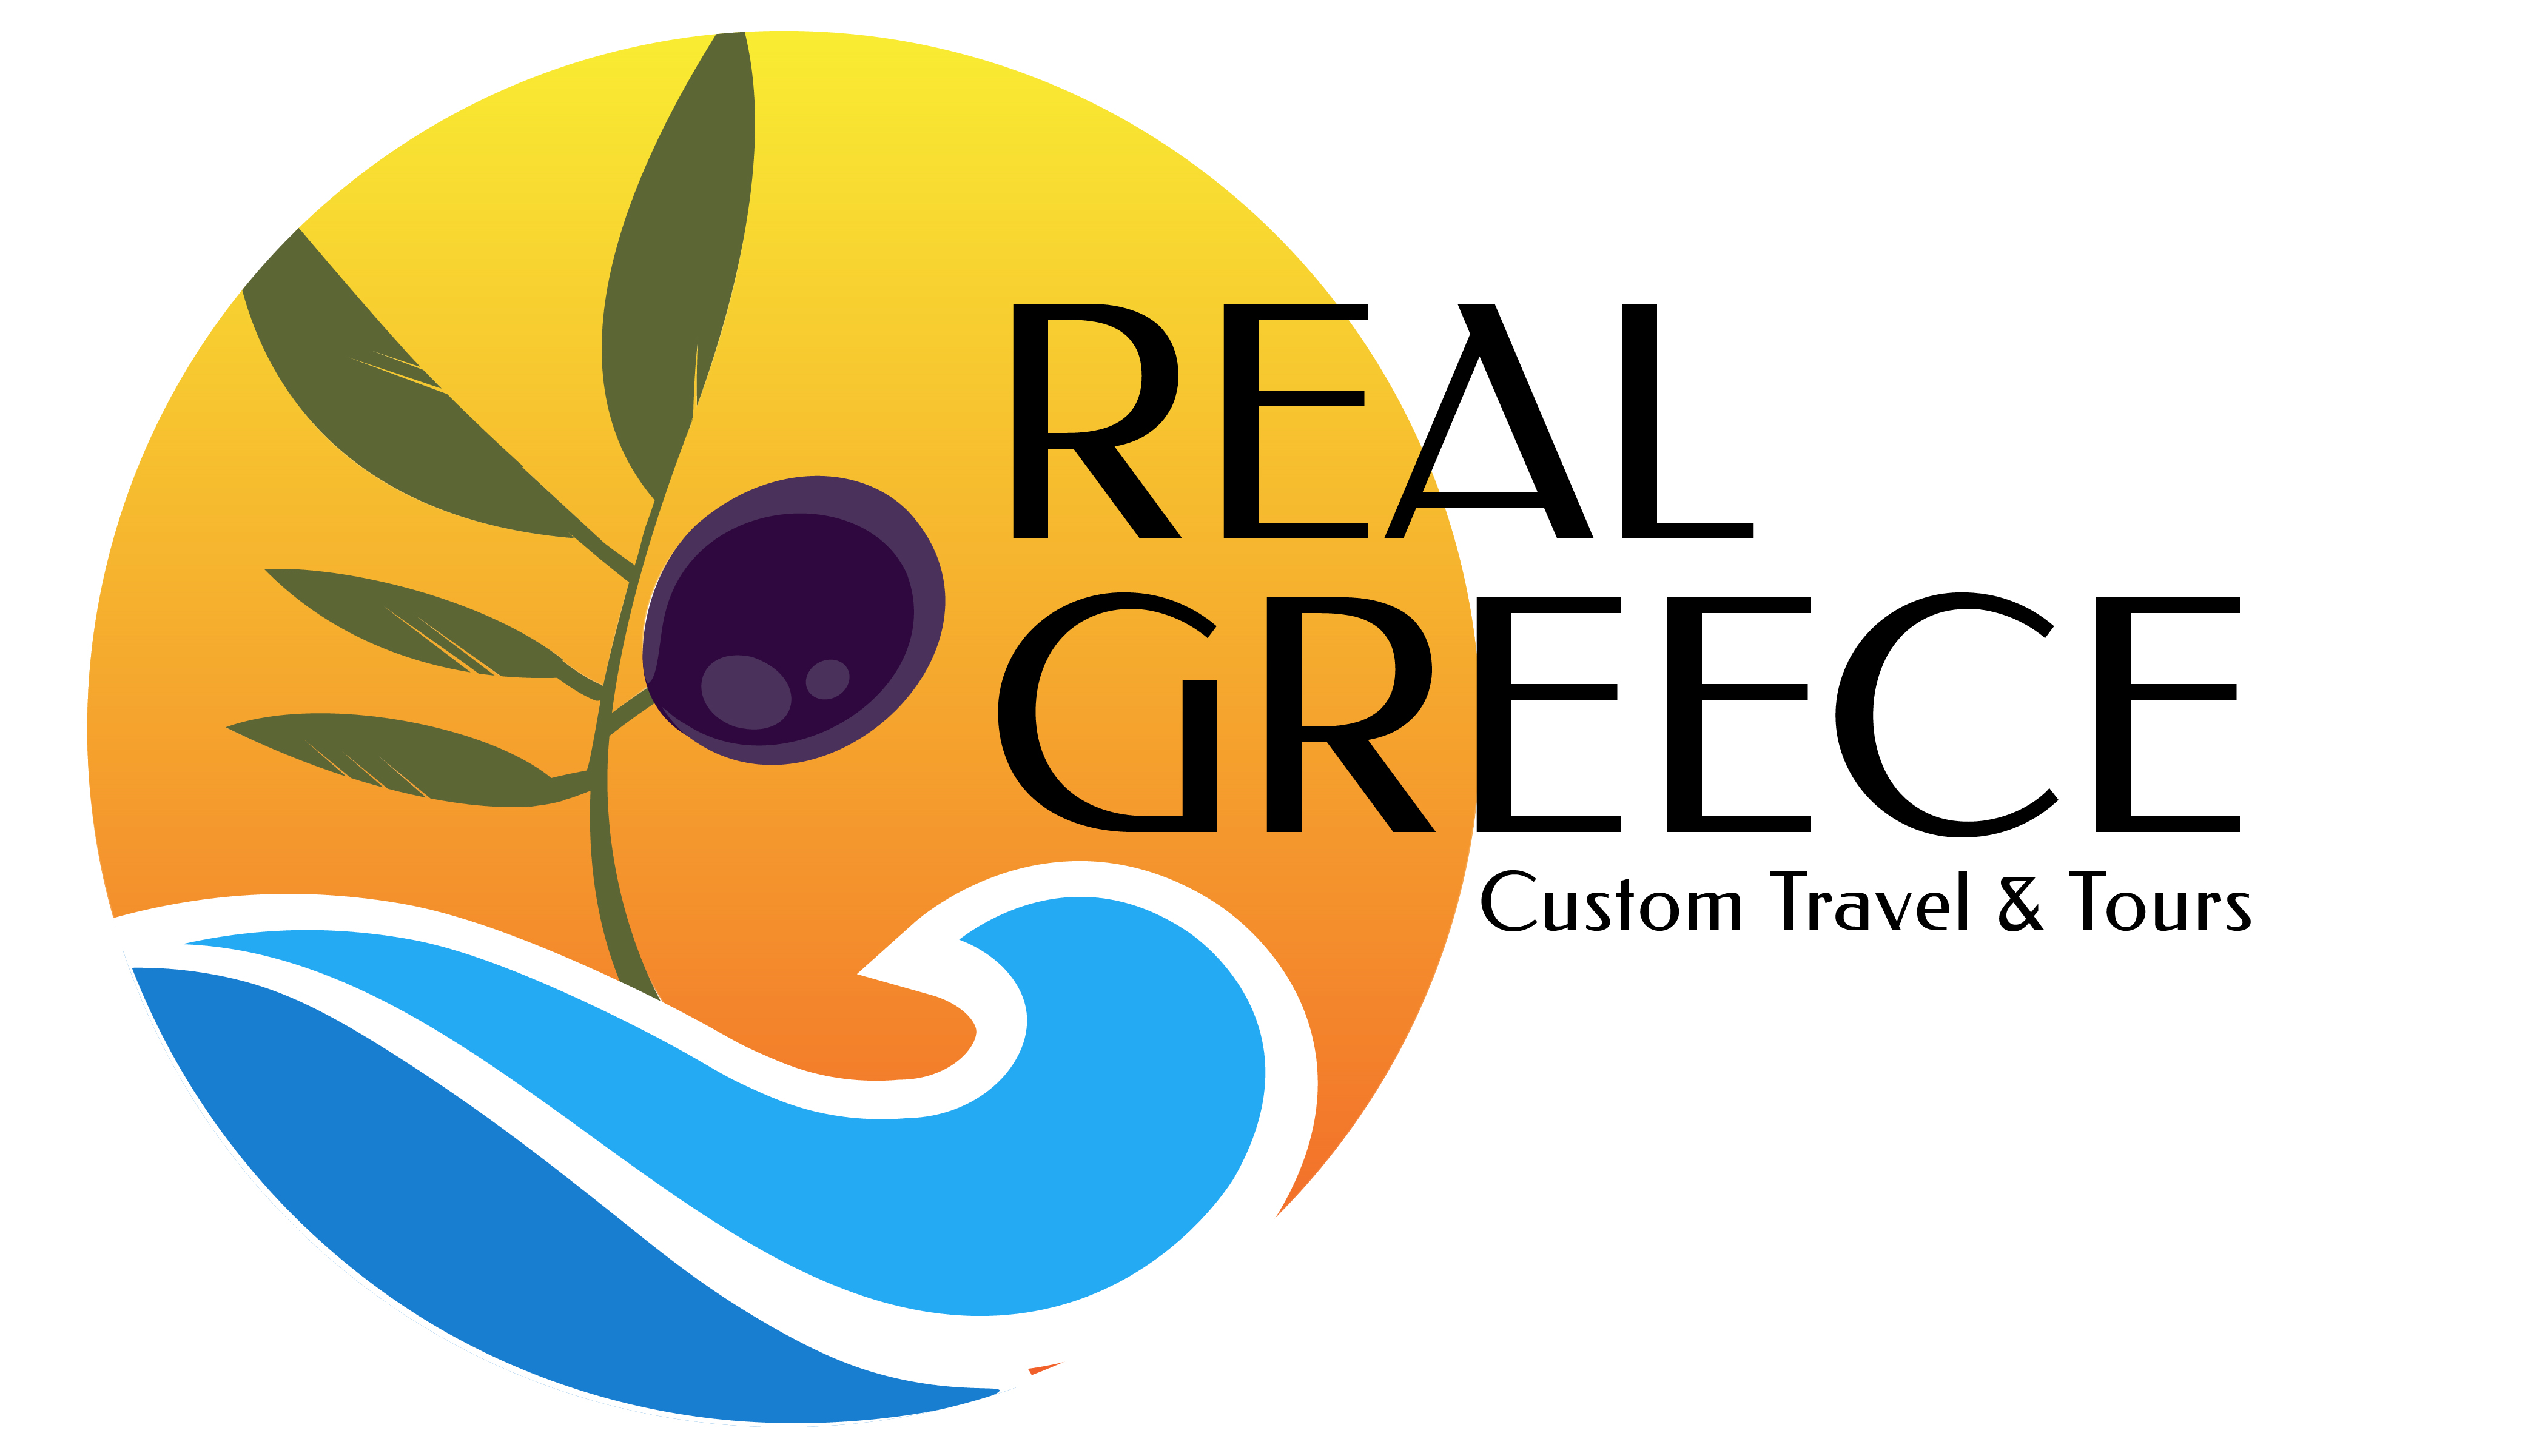 Real Greece Travel & Tours